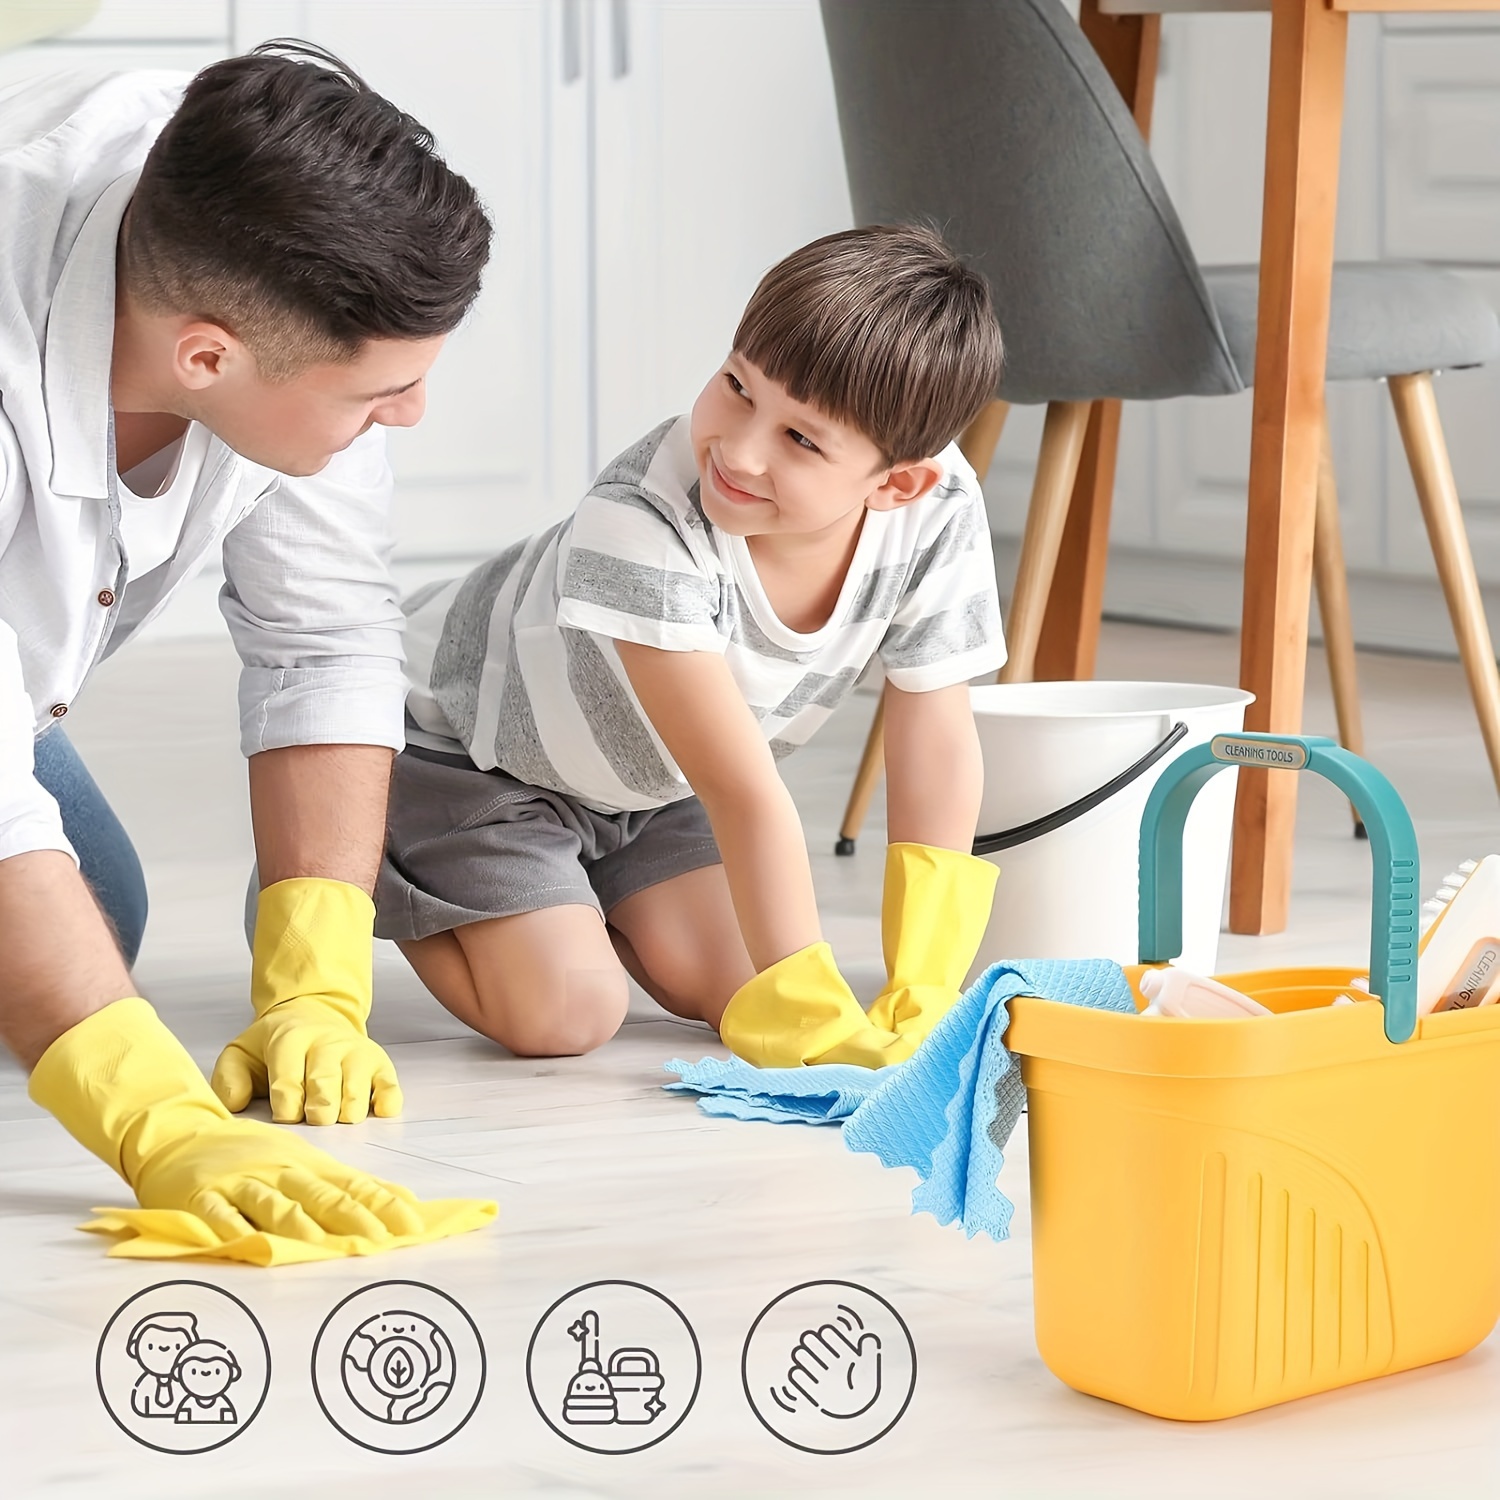 

Detachable Cleaning Set For Kids: Toy Sweep, Mop, And Dustpan